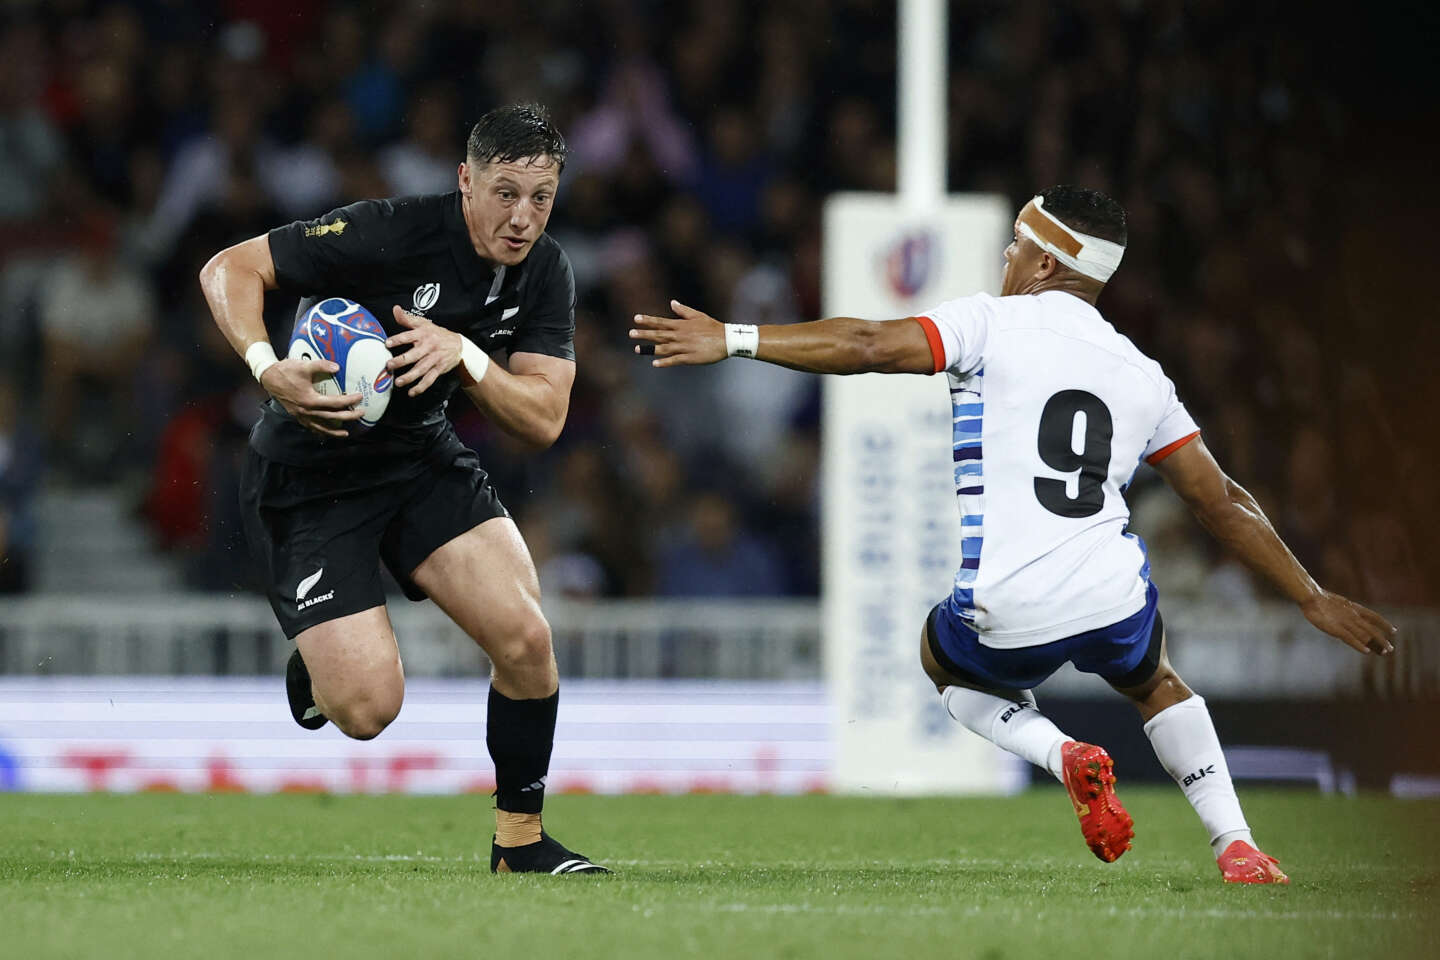 Sweeping a weakened Namibia, the All Blacks breathe but remain in the dark